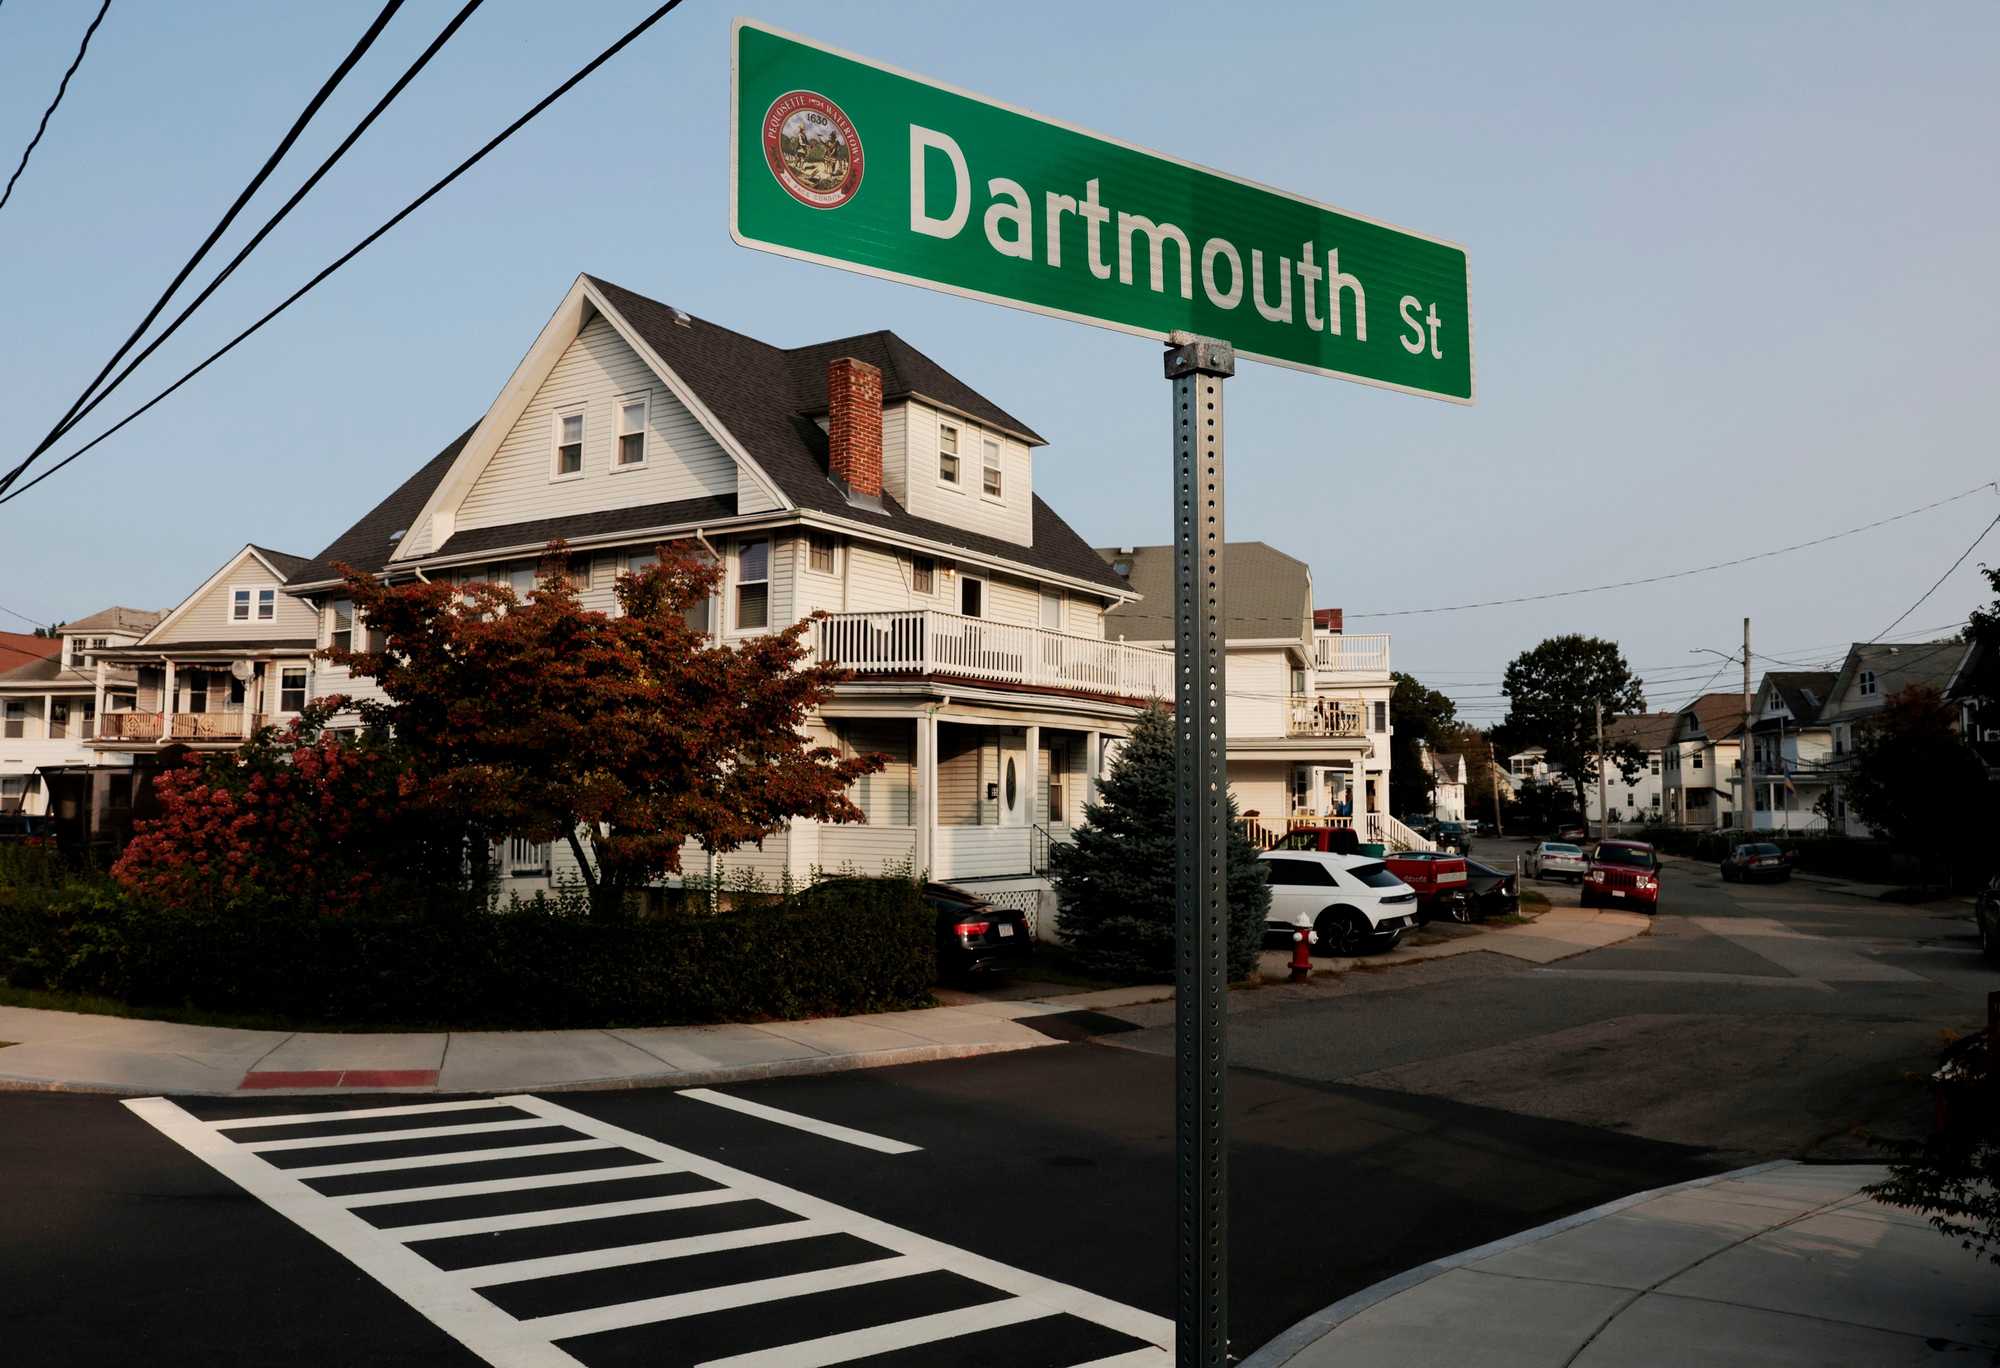 Dartmouth Street includes roughly 20 houses with grassy yards and black mailboxes brimming with envelopes. Around it, East Watertown provided a haven for a hodgepodge of immigrant families — Armenian, Italian, Greek, Irish.